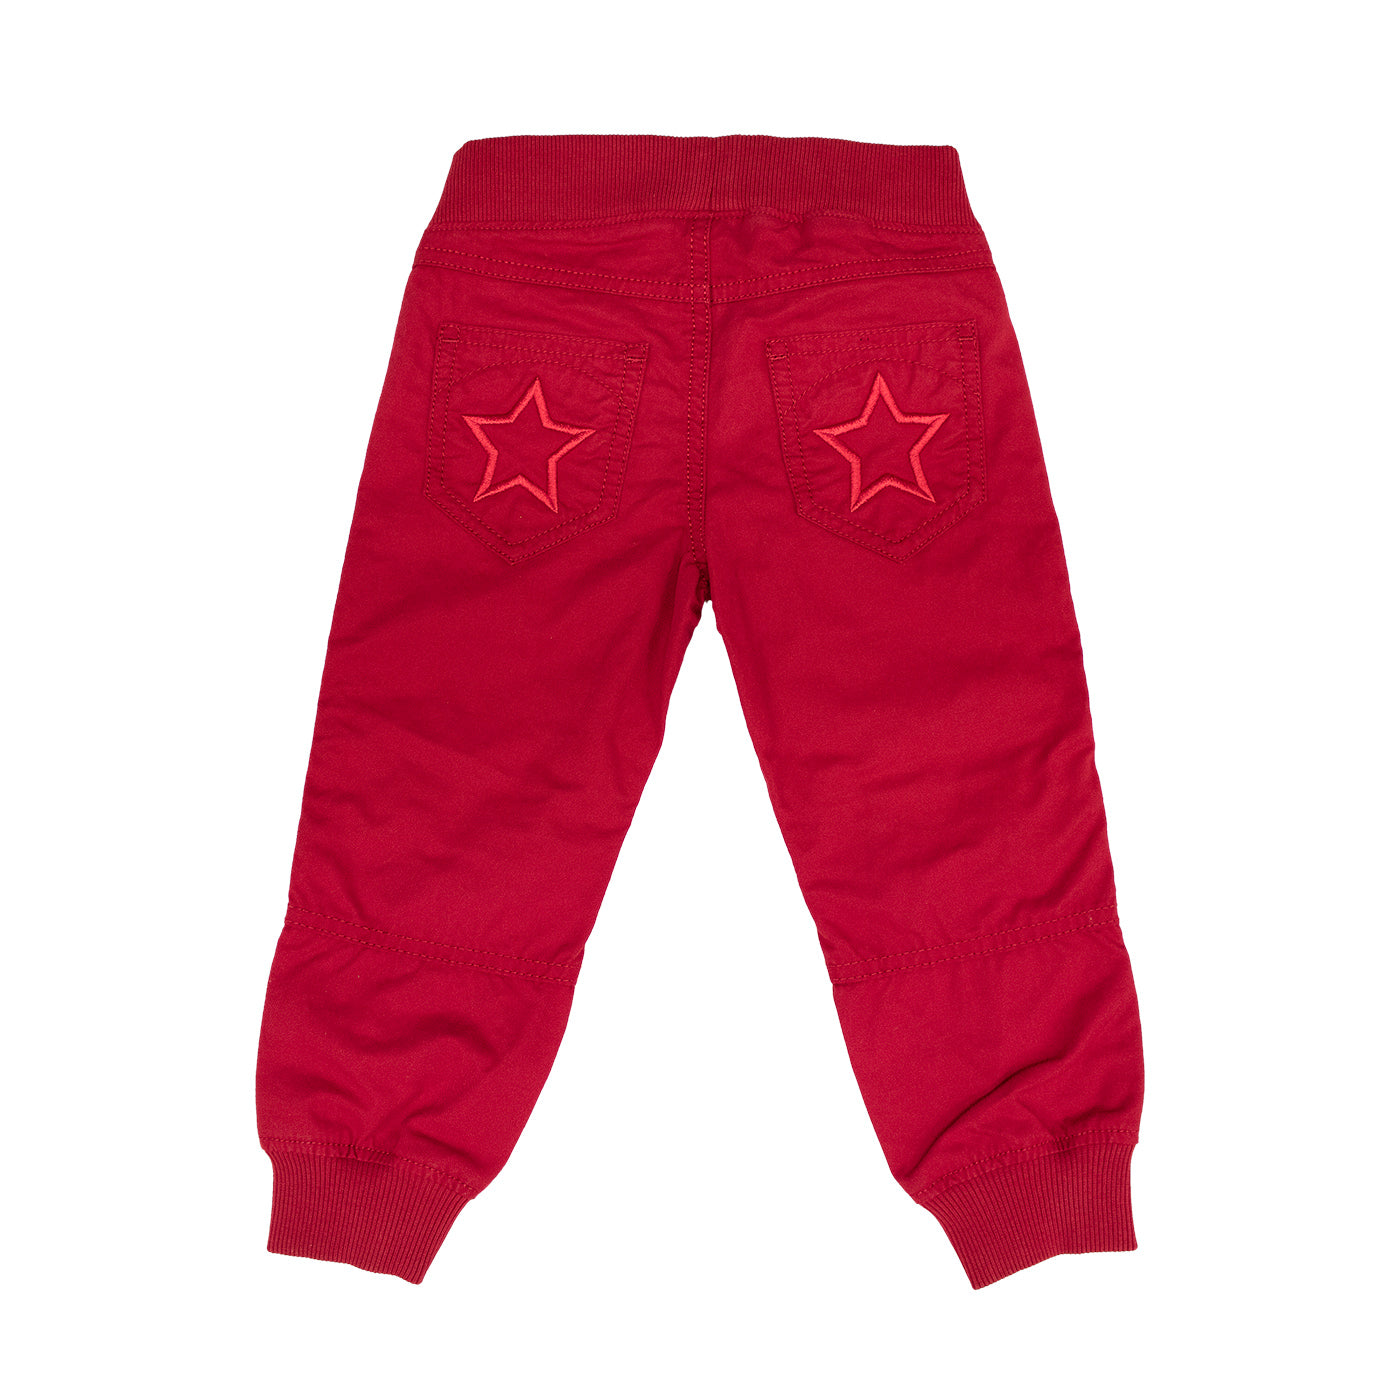 Masai Clothing Pippi Trouser in Tango Red